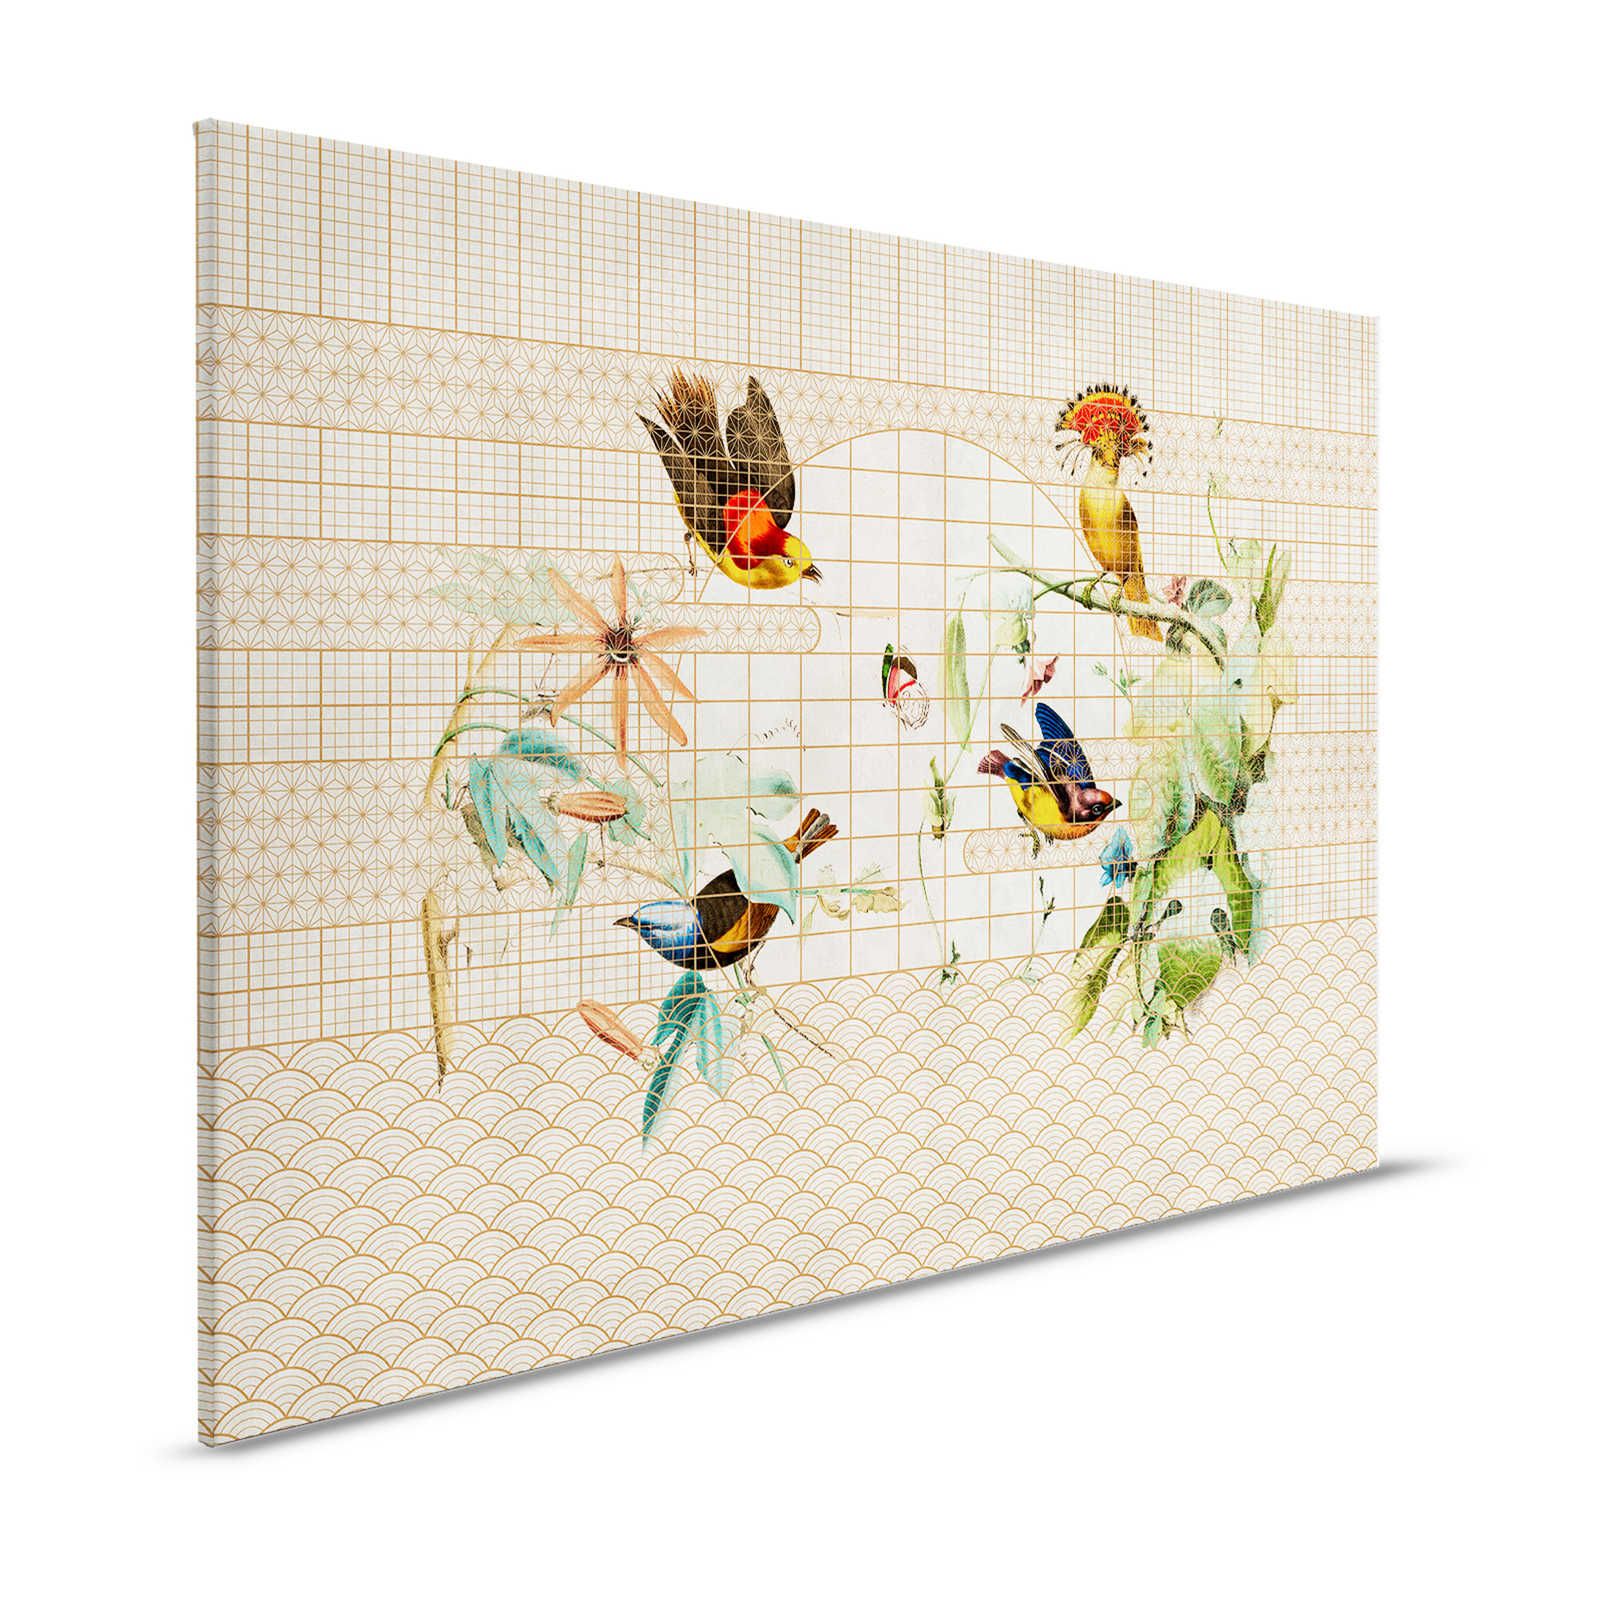 Aviary 1 - Canvas painting Birds & Butterflies in Golden Aviary - 1.20 m x 0.80 m
